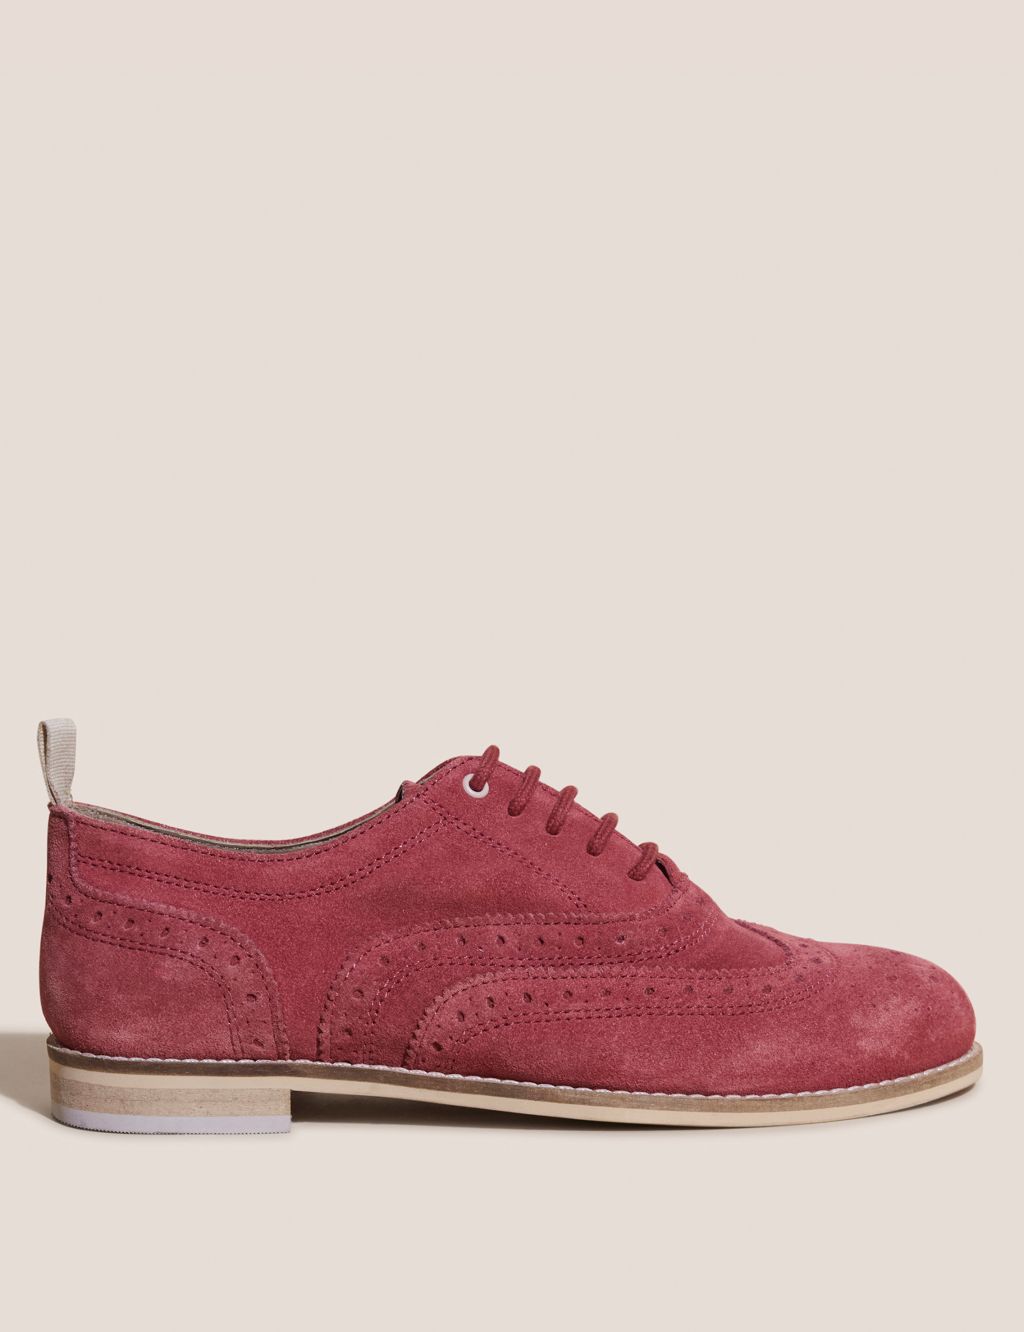 Suede Lace Up Flat Brogues image 1